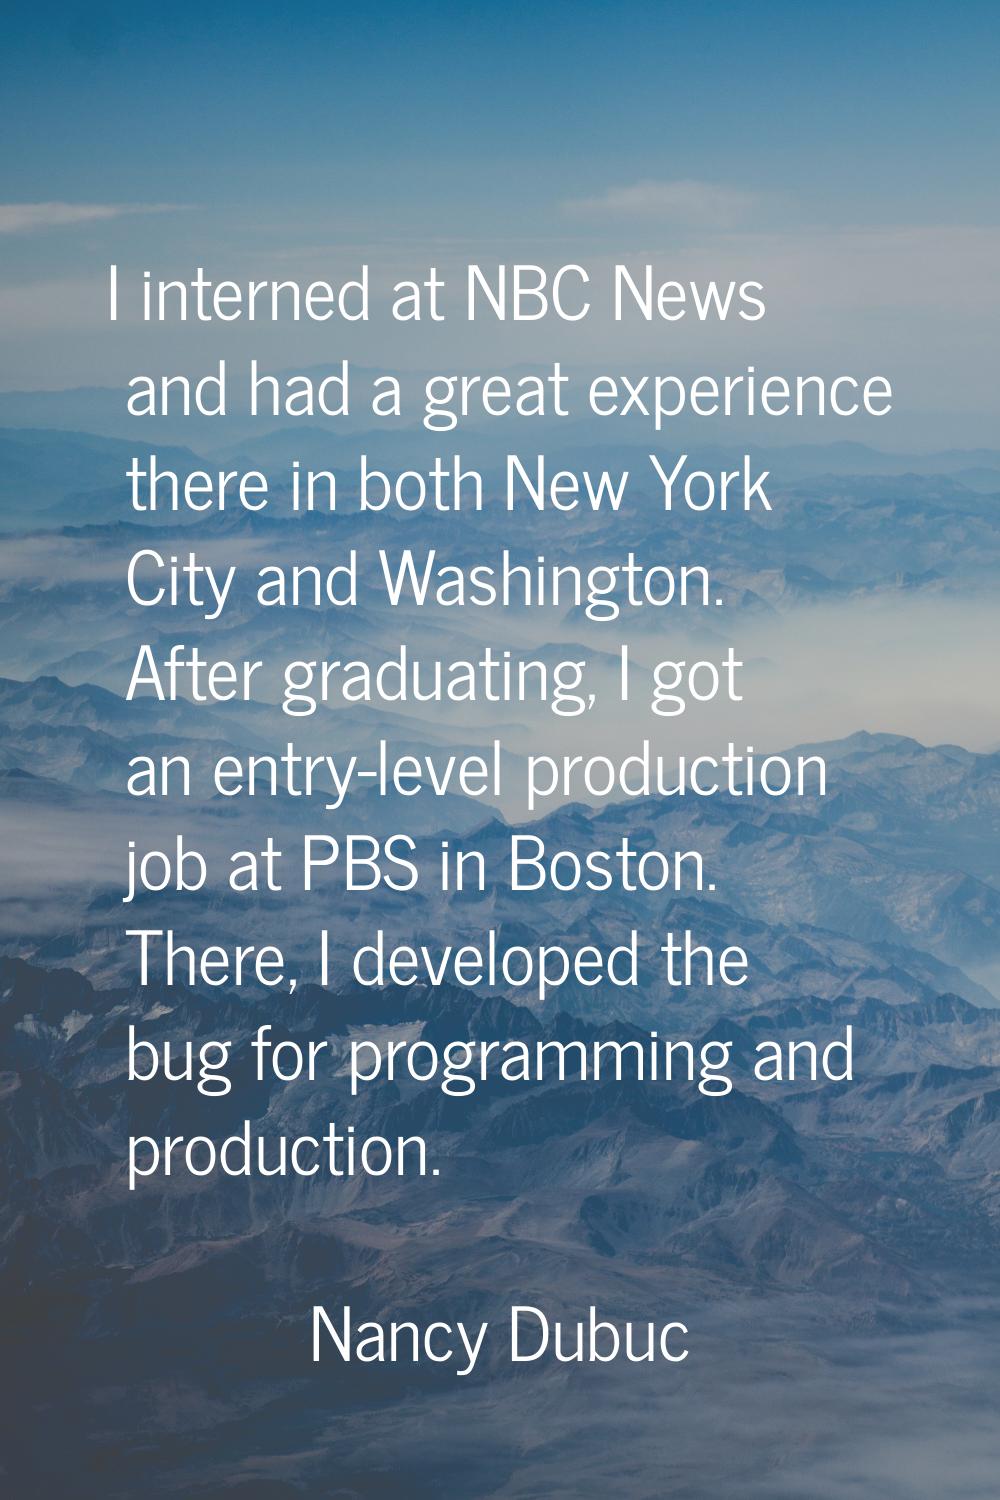 I interned at NBC News and had a great experience there in both New York City and Washington. After